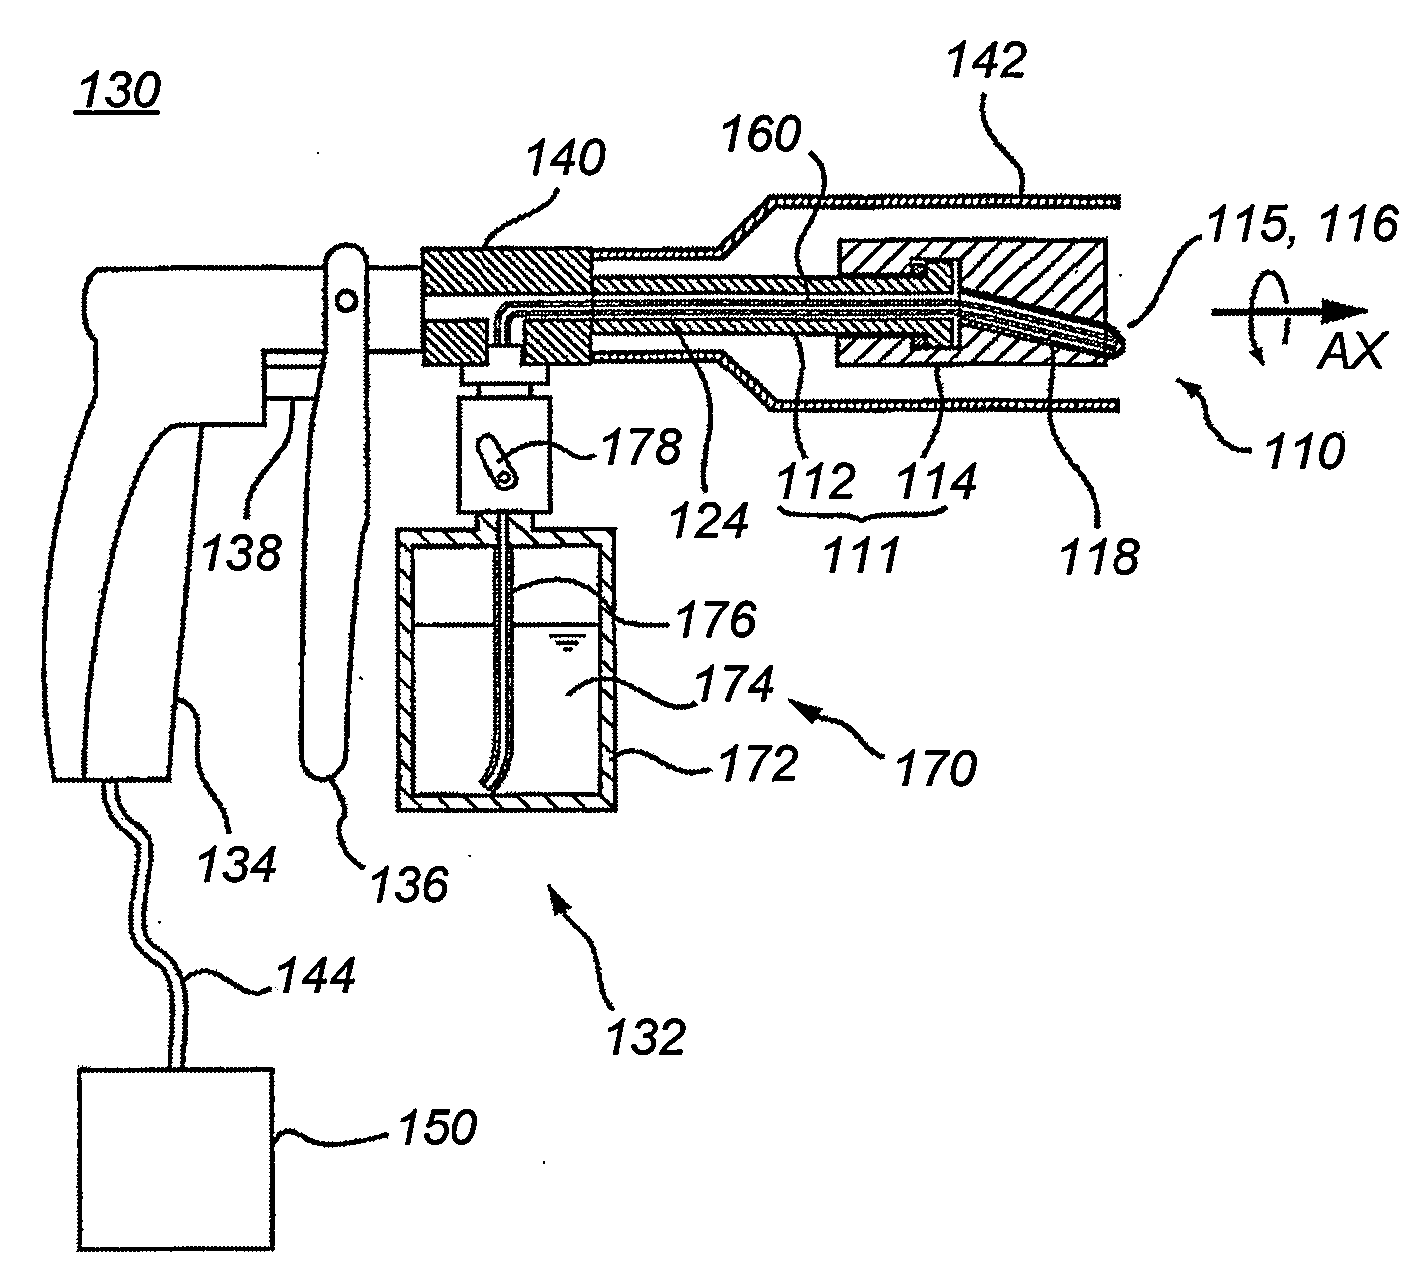 Nozzle system and method